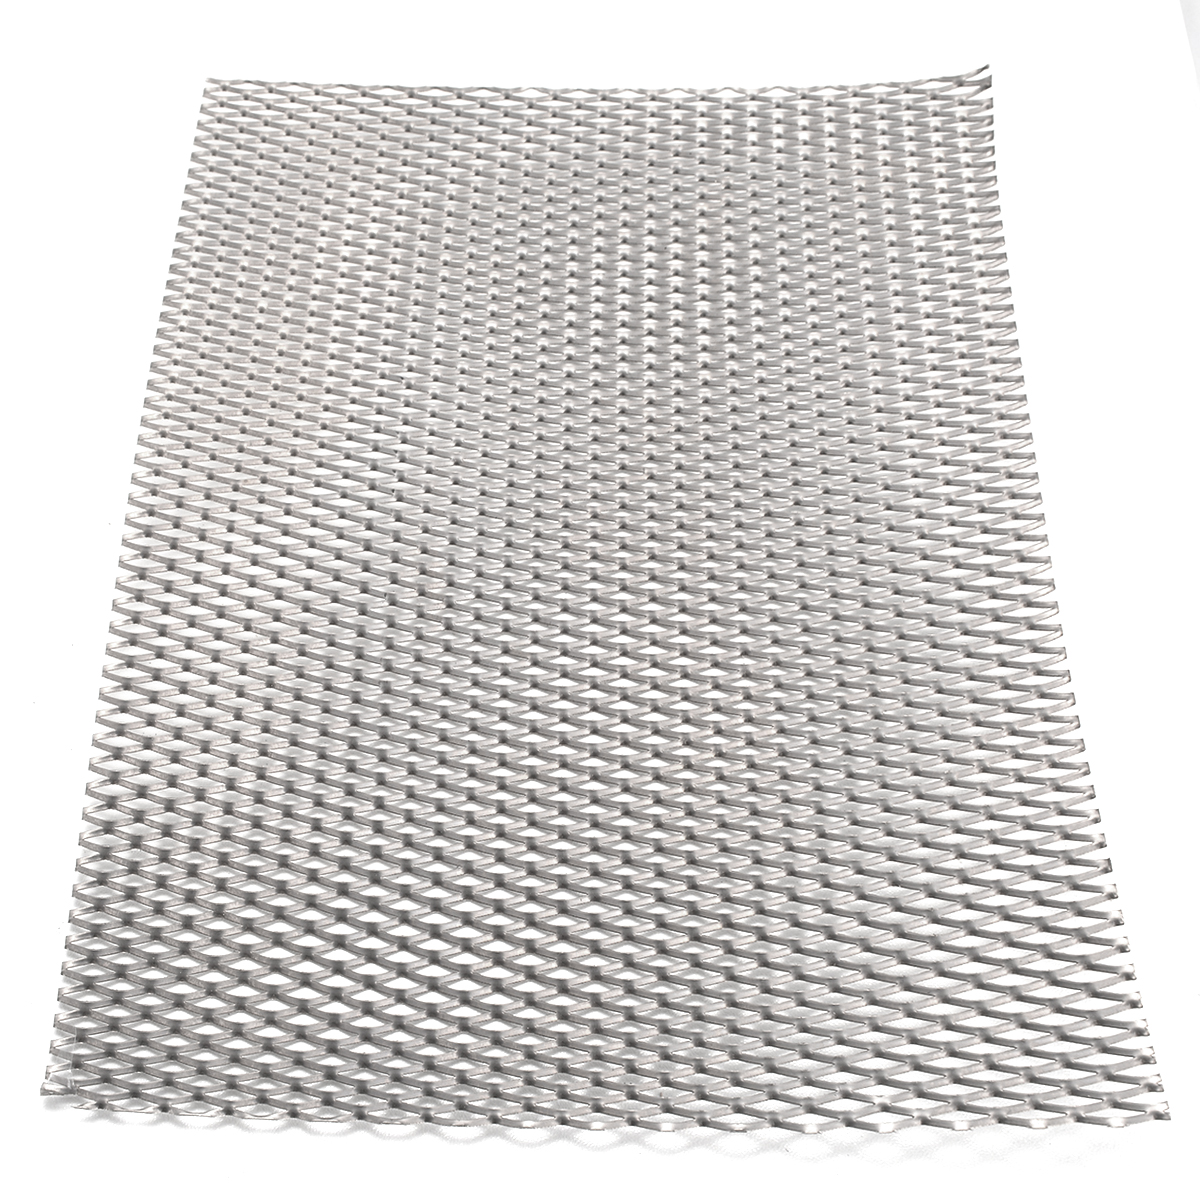 1pc Practical Metal Titanium Mesh Sheet Heat Corrosion Resistance Perforated Expanded Plate 200mm*300mm*0.5mm Mayitr